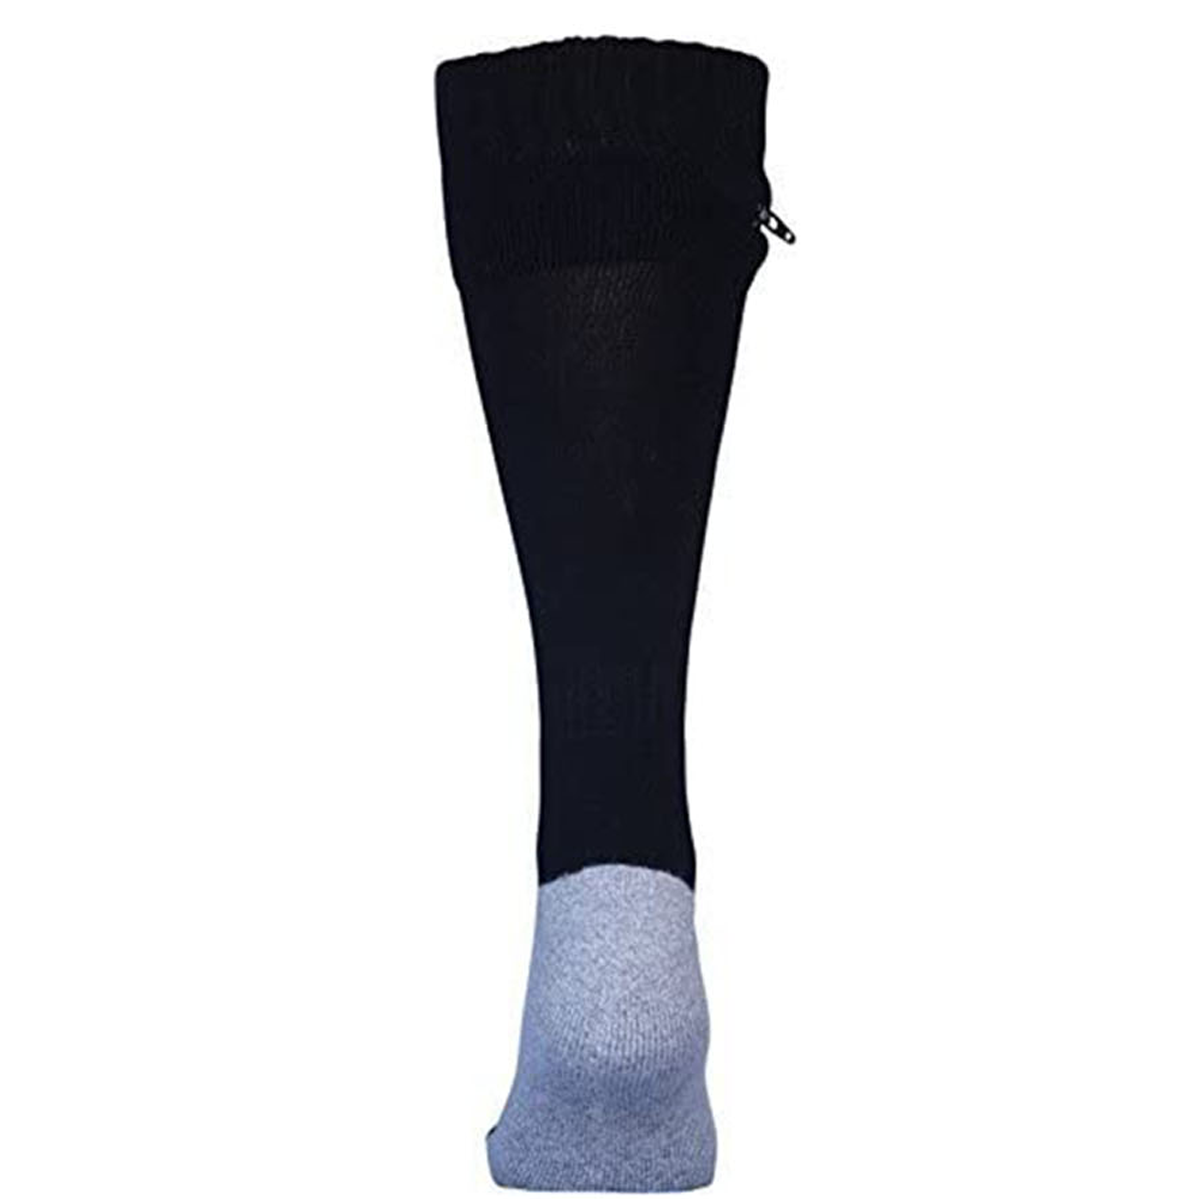 Pocket Socks: The Ultimate Travel Security Socks with Zippered Pocket MMi Products UK